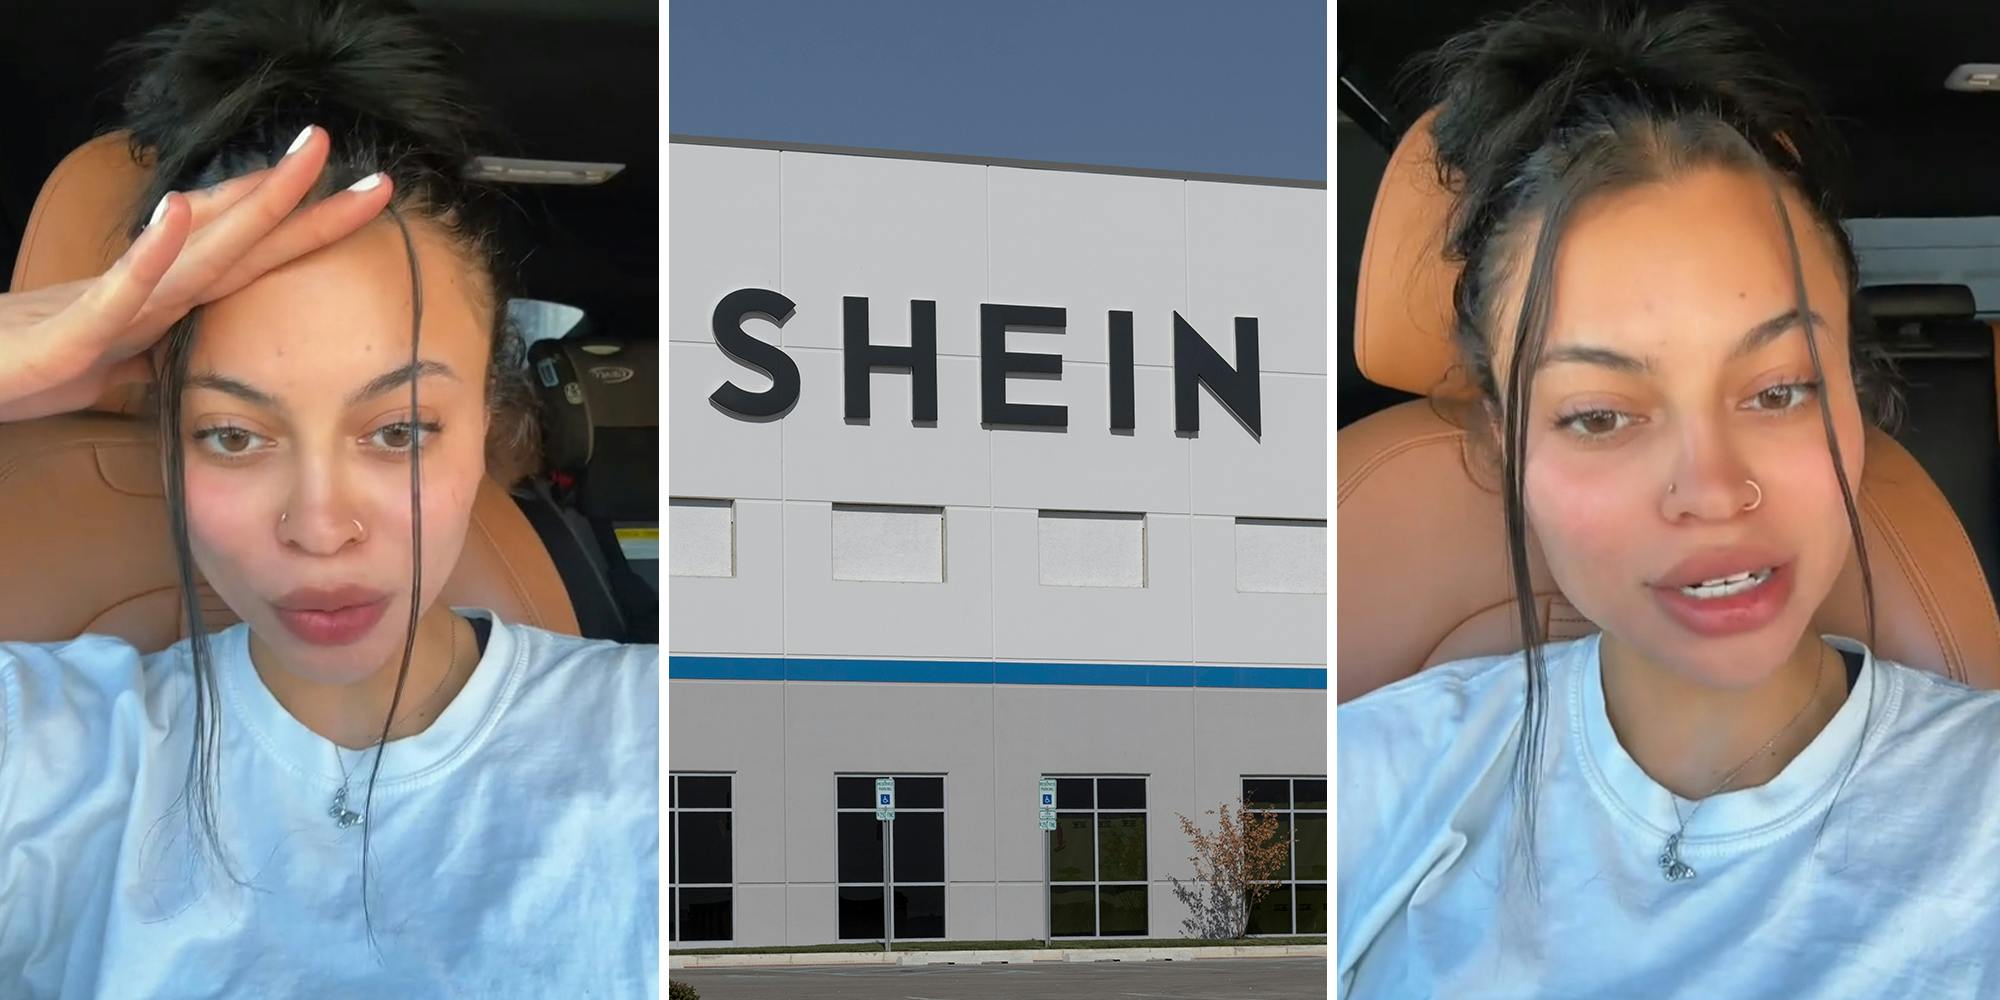 ‘They better write you a check’: Woman slams Shein for using her photo in advertisement—and editing her face